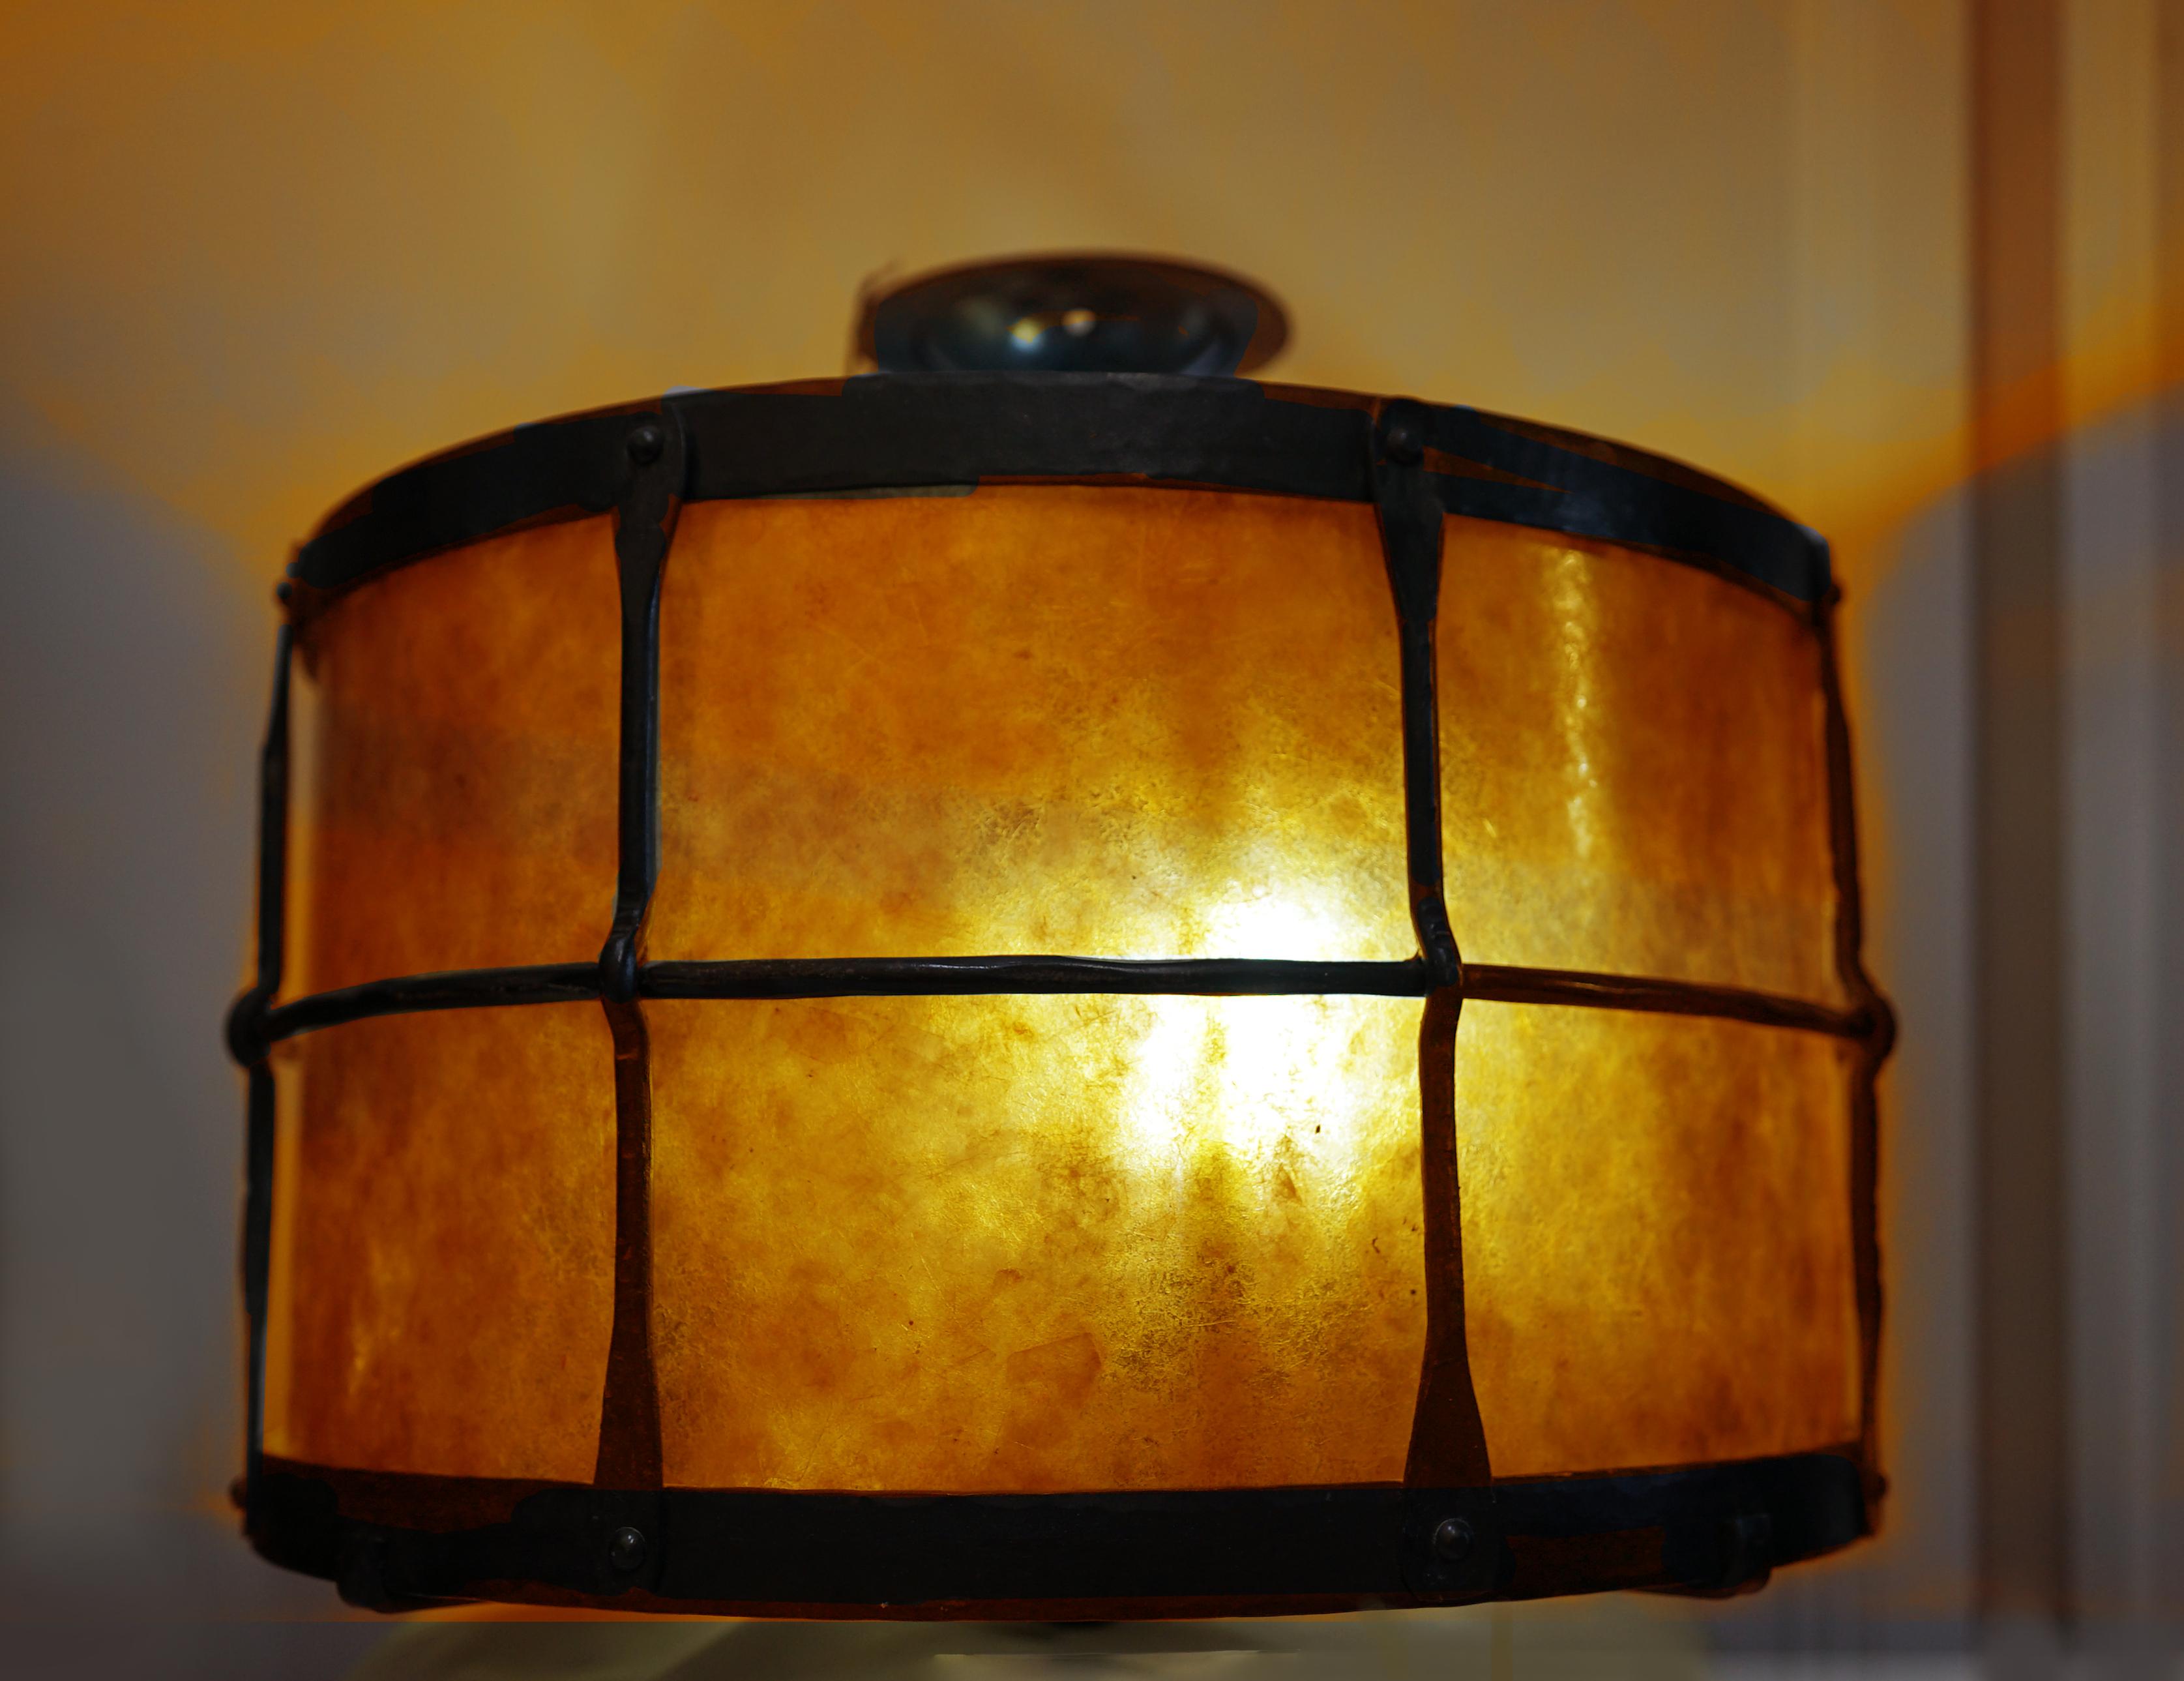 A combination of light and warmth combine to make this flushmount Mica shade drum fixture in wrought iron a great choice for a number of settings.  The feel is rustic and modern all at once. It is enhanced by the genuine Mica shade which creates a